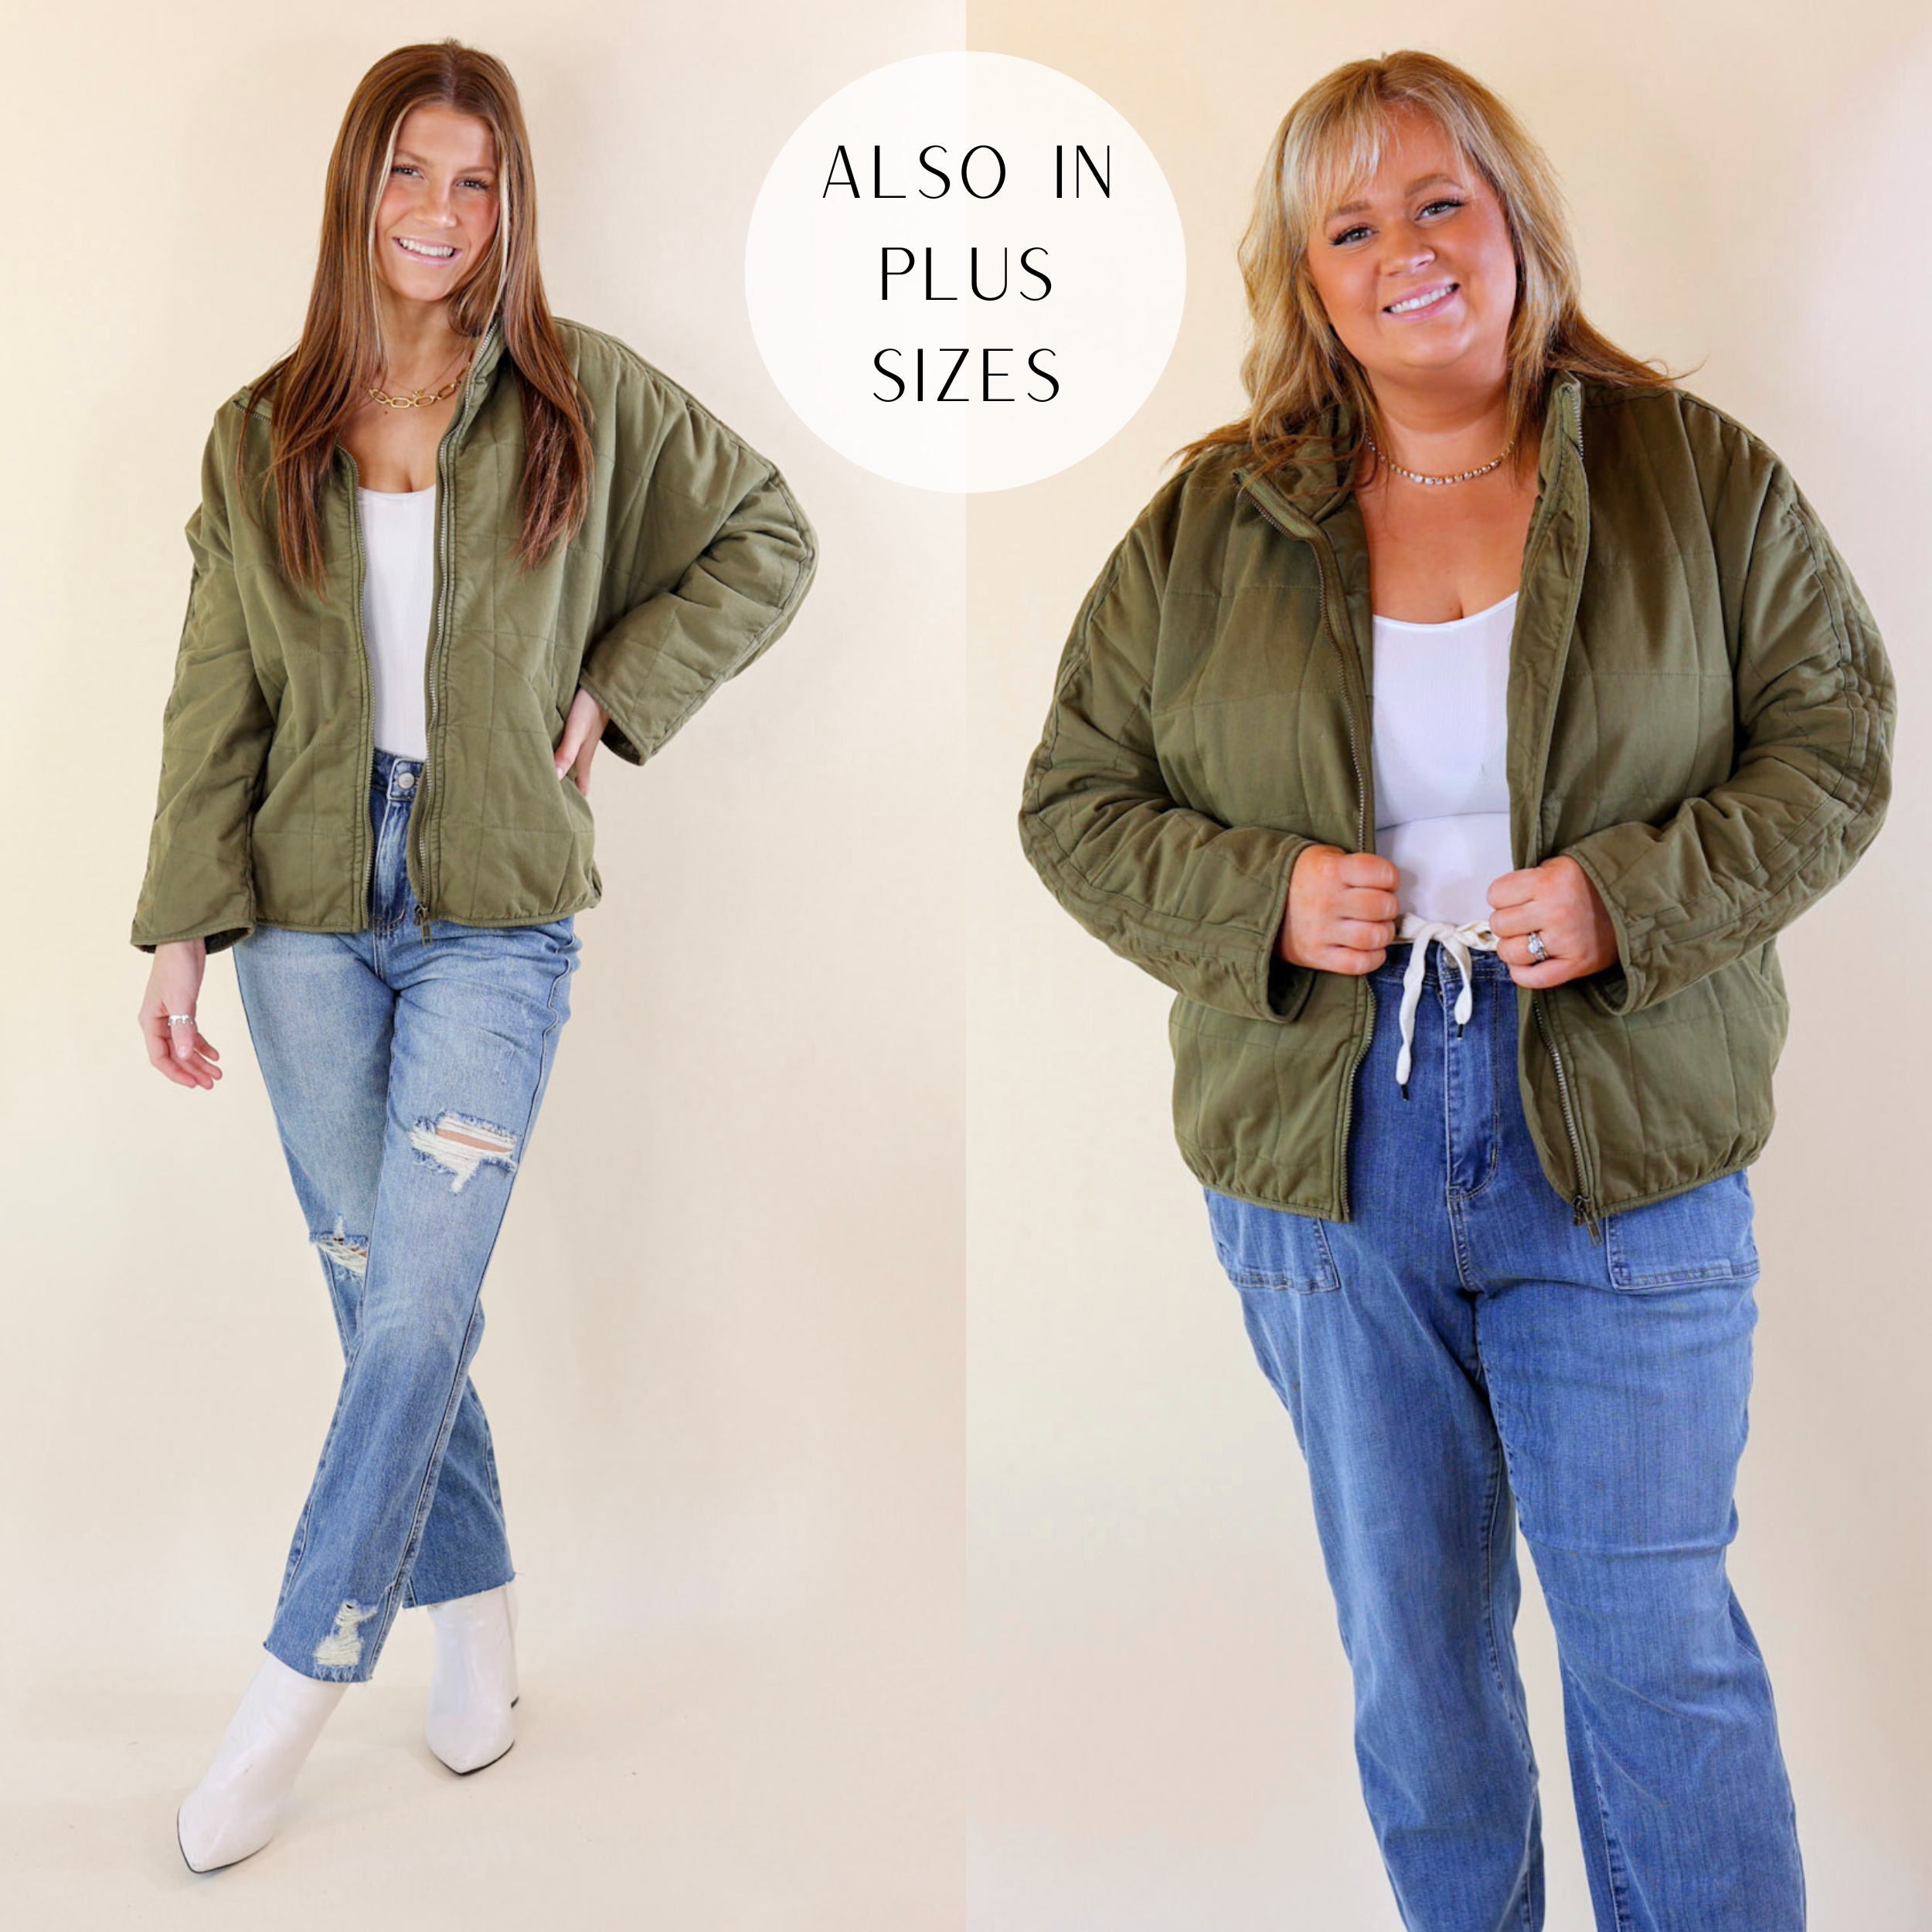 Models are wearing an olive green, quilted, zip up jacket.  Size small model has it paired with distressed Judy Blue jeans, white booties, and a white tank top. Size plus model has it paired with Judy Blue jeans, white undershirt, and silver jewelry. 